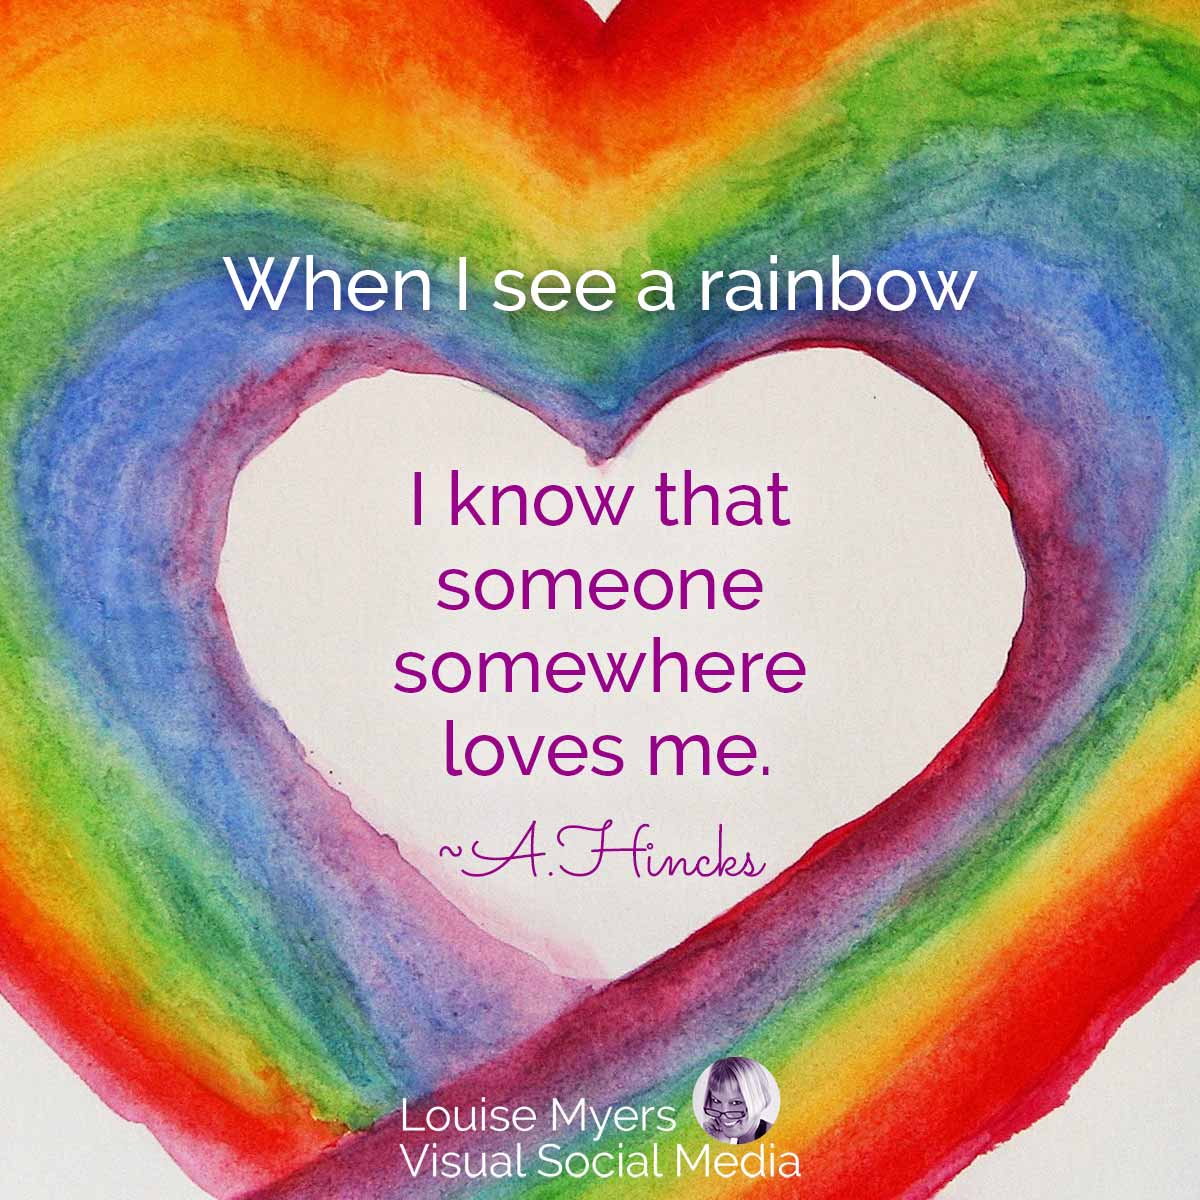 painting of double rainbow making a heart has quote, when I see a rainbow I know someone loves me.